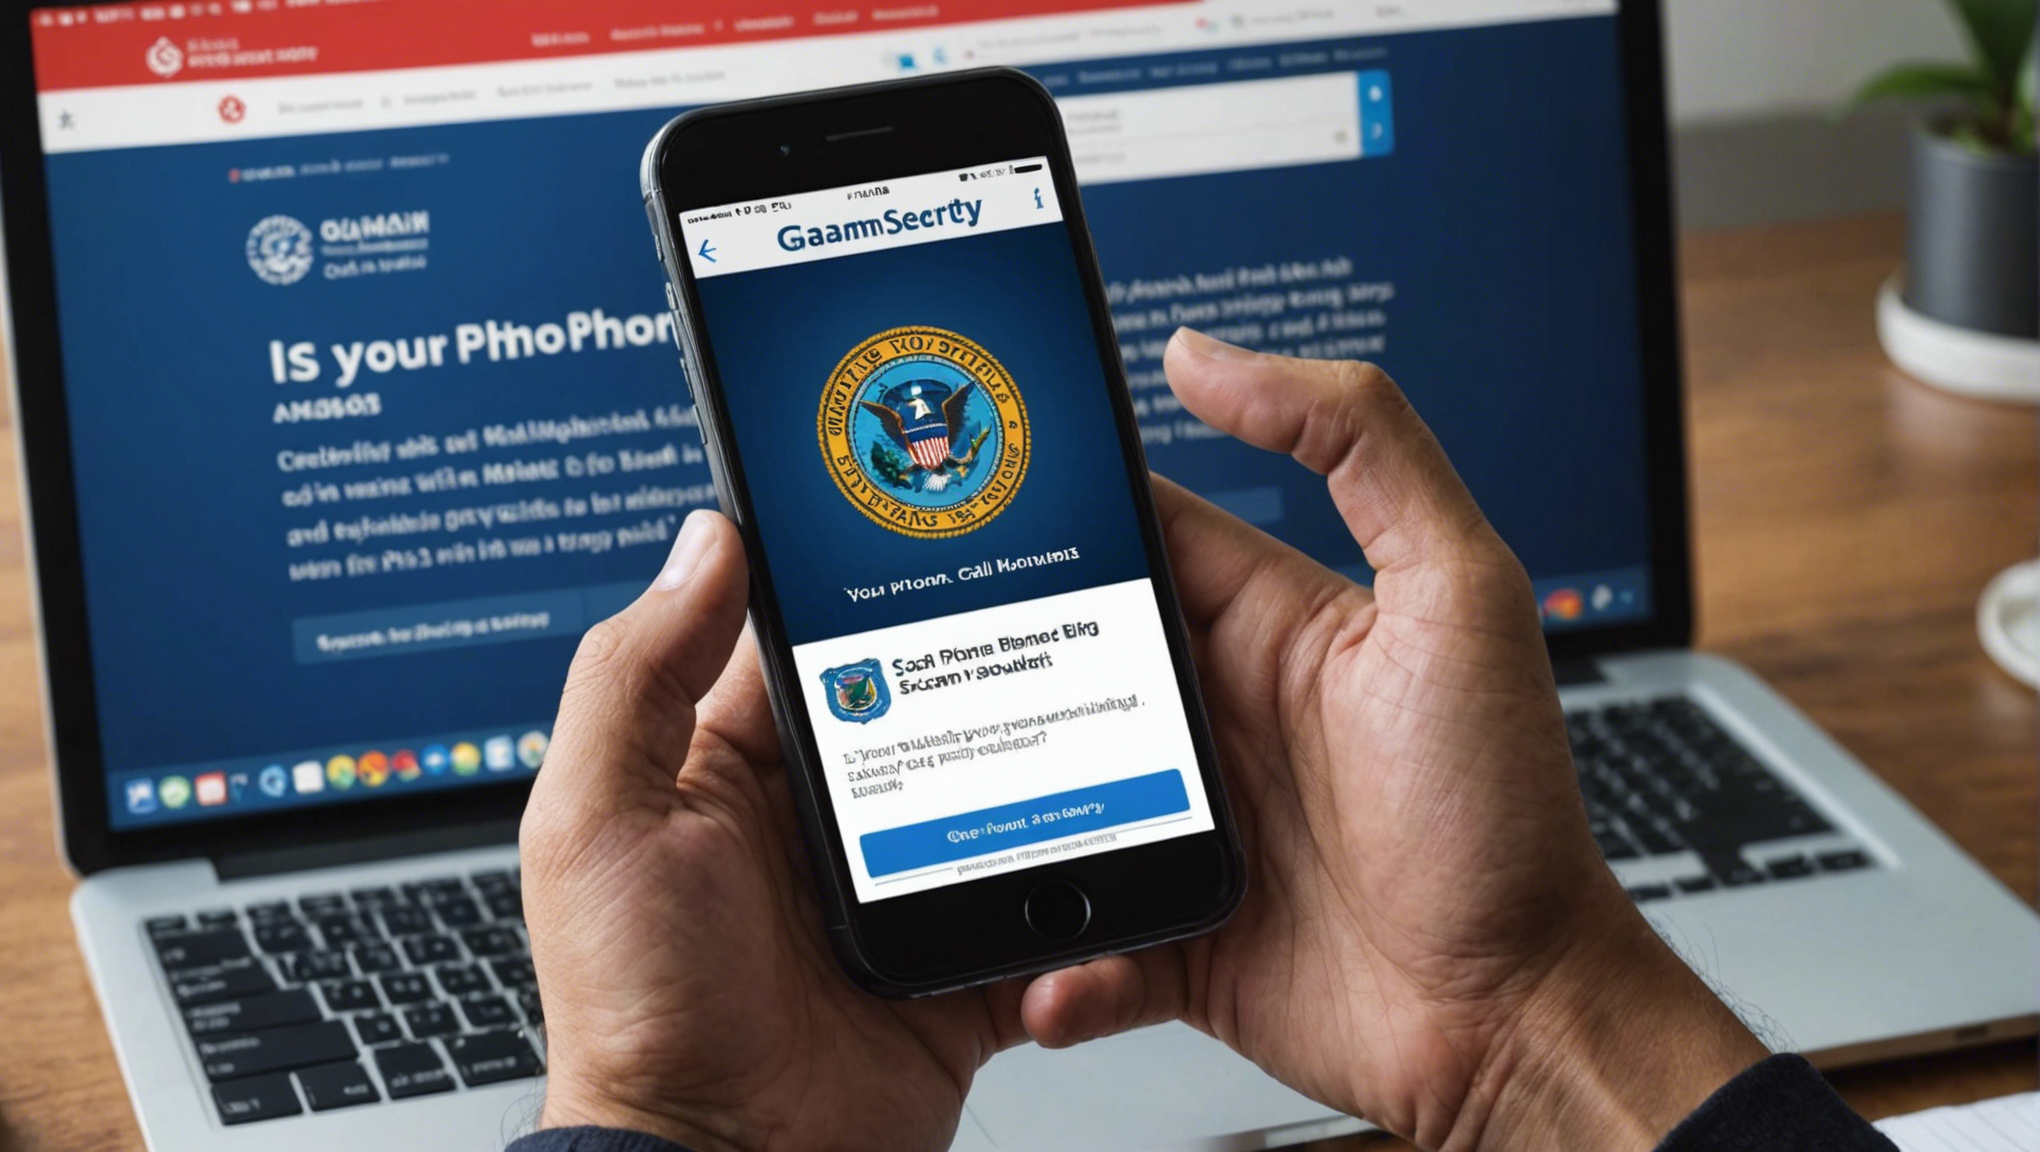 protect yourself from scam calls and messages! guam homeland security issues a warning for phone users at risk.